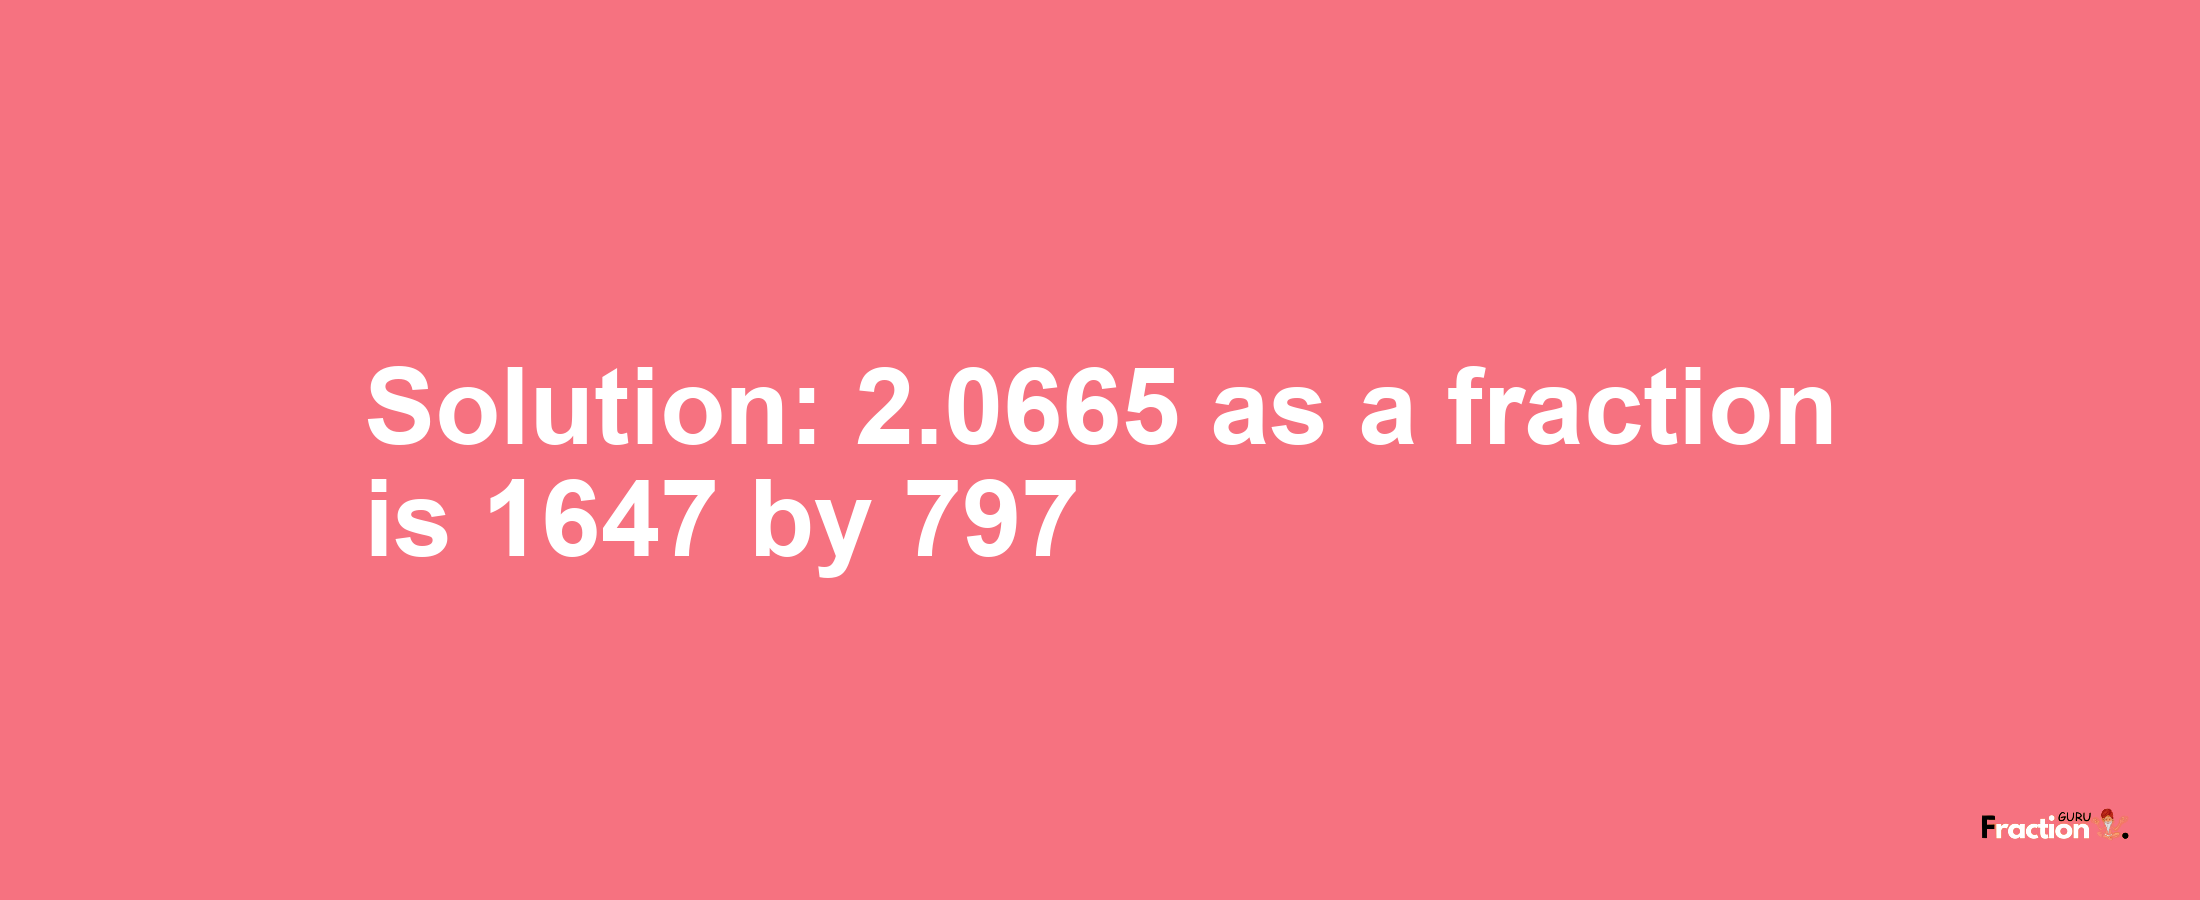 Solution:2.0665 as a fraction is 1647/797